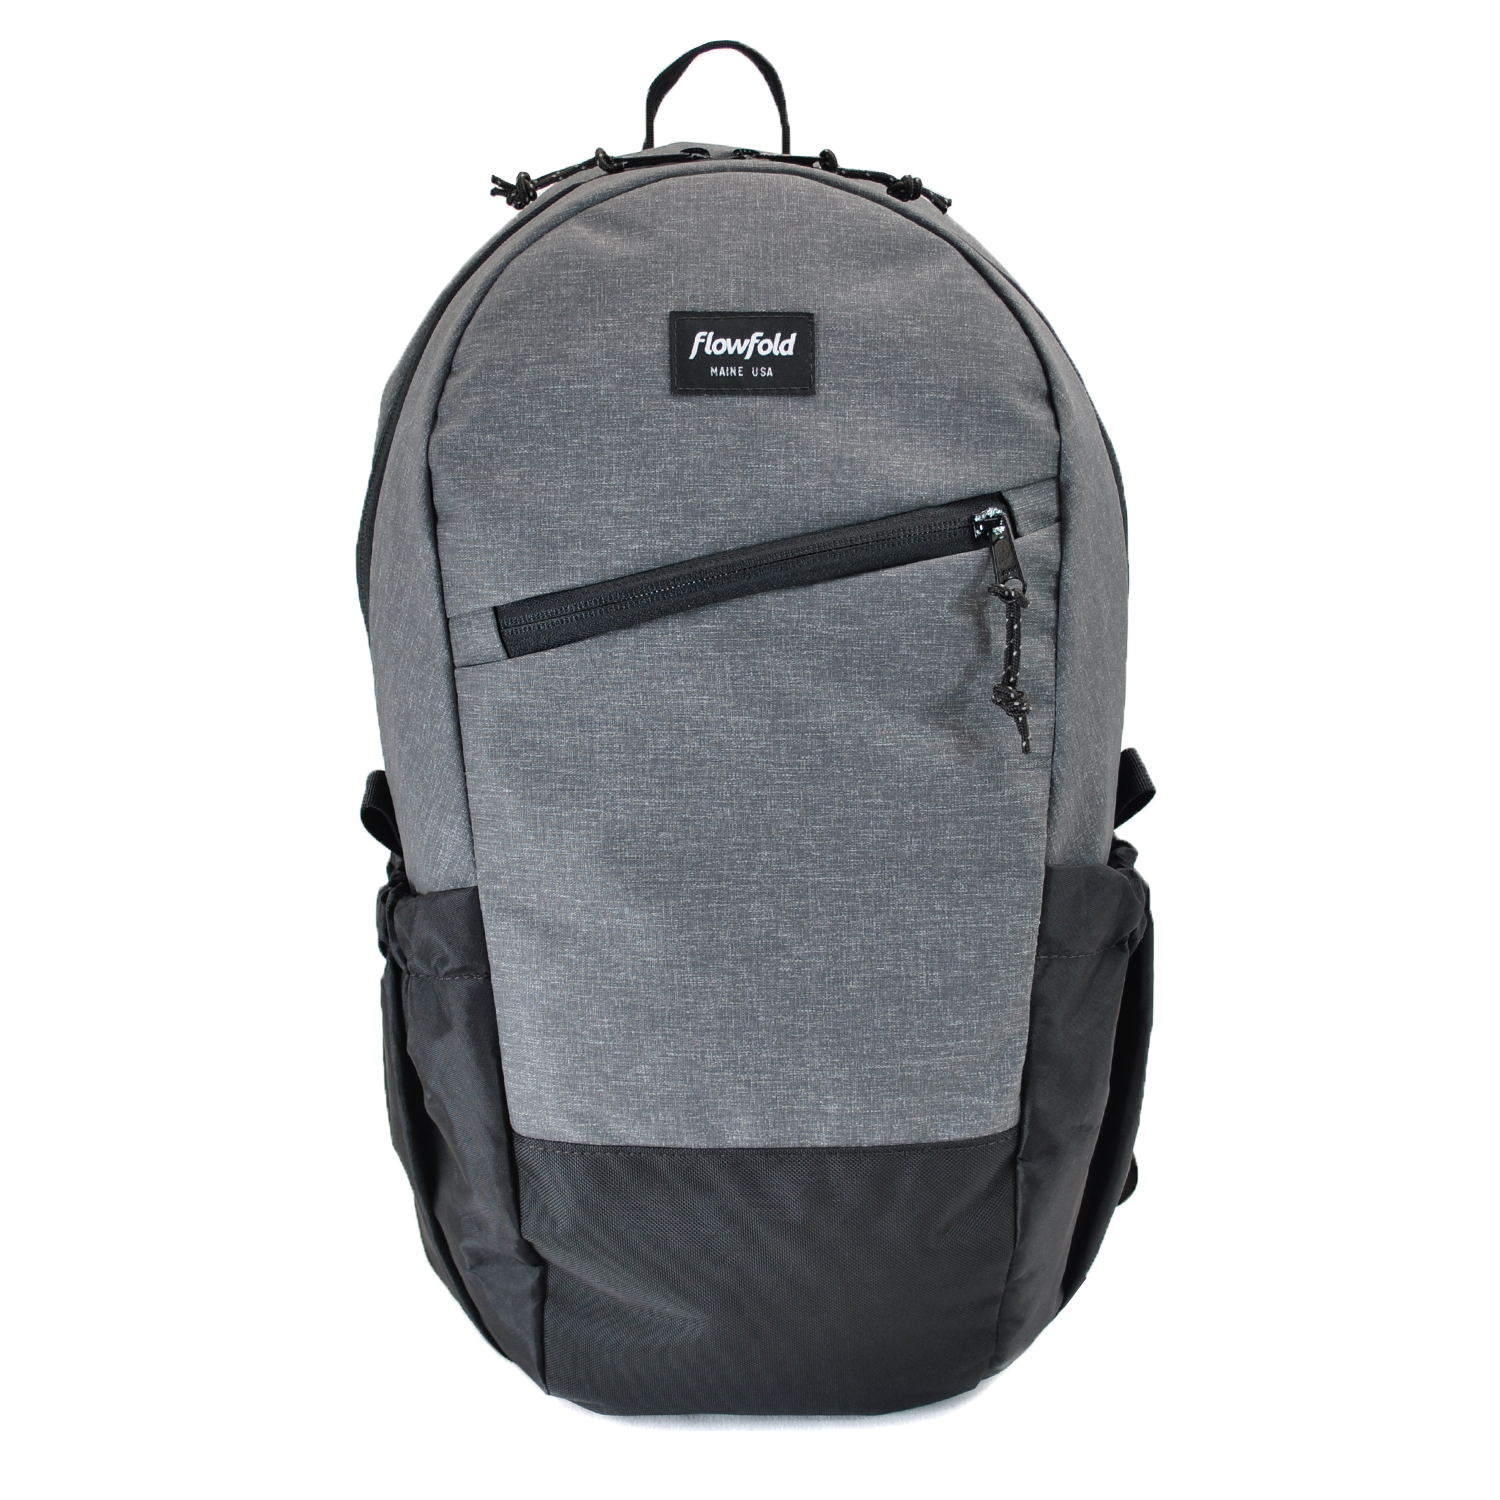 Flowfold 18L Optimist large backpack with water bottle sleeves recycled heather grey